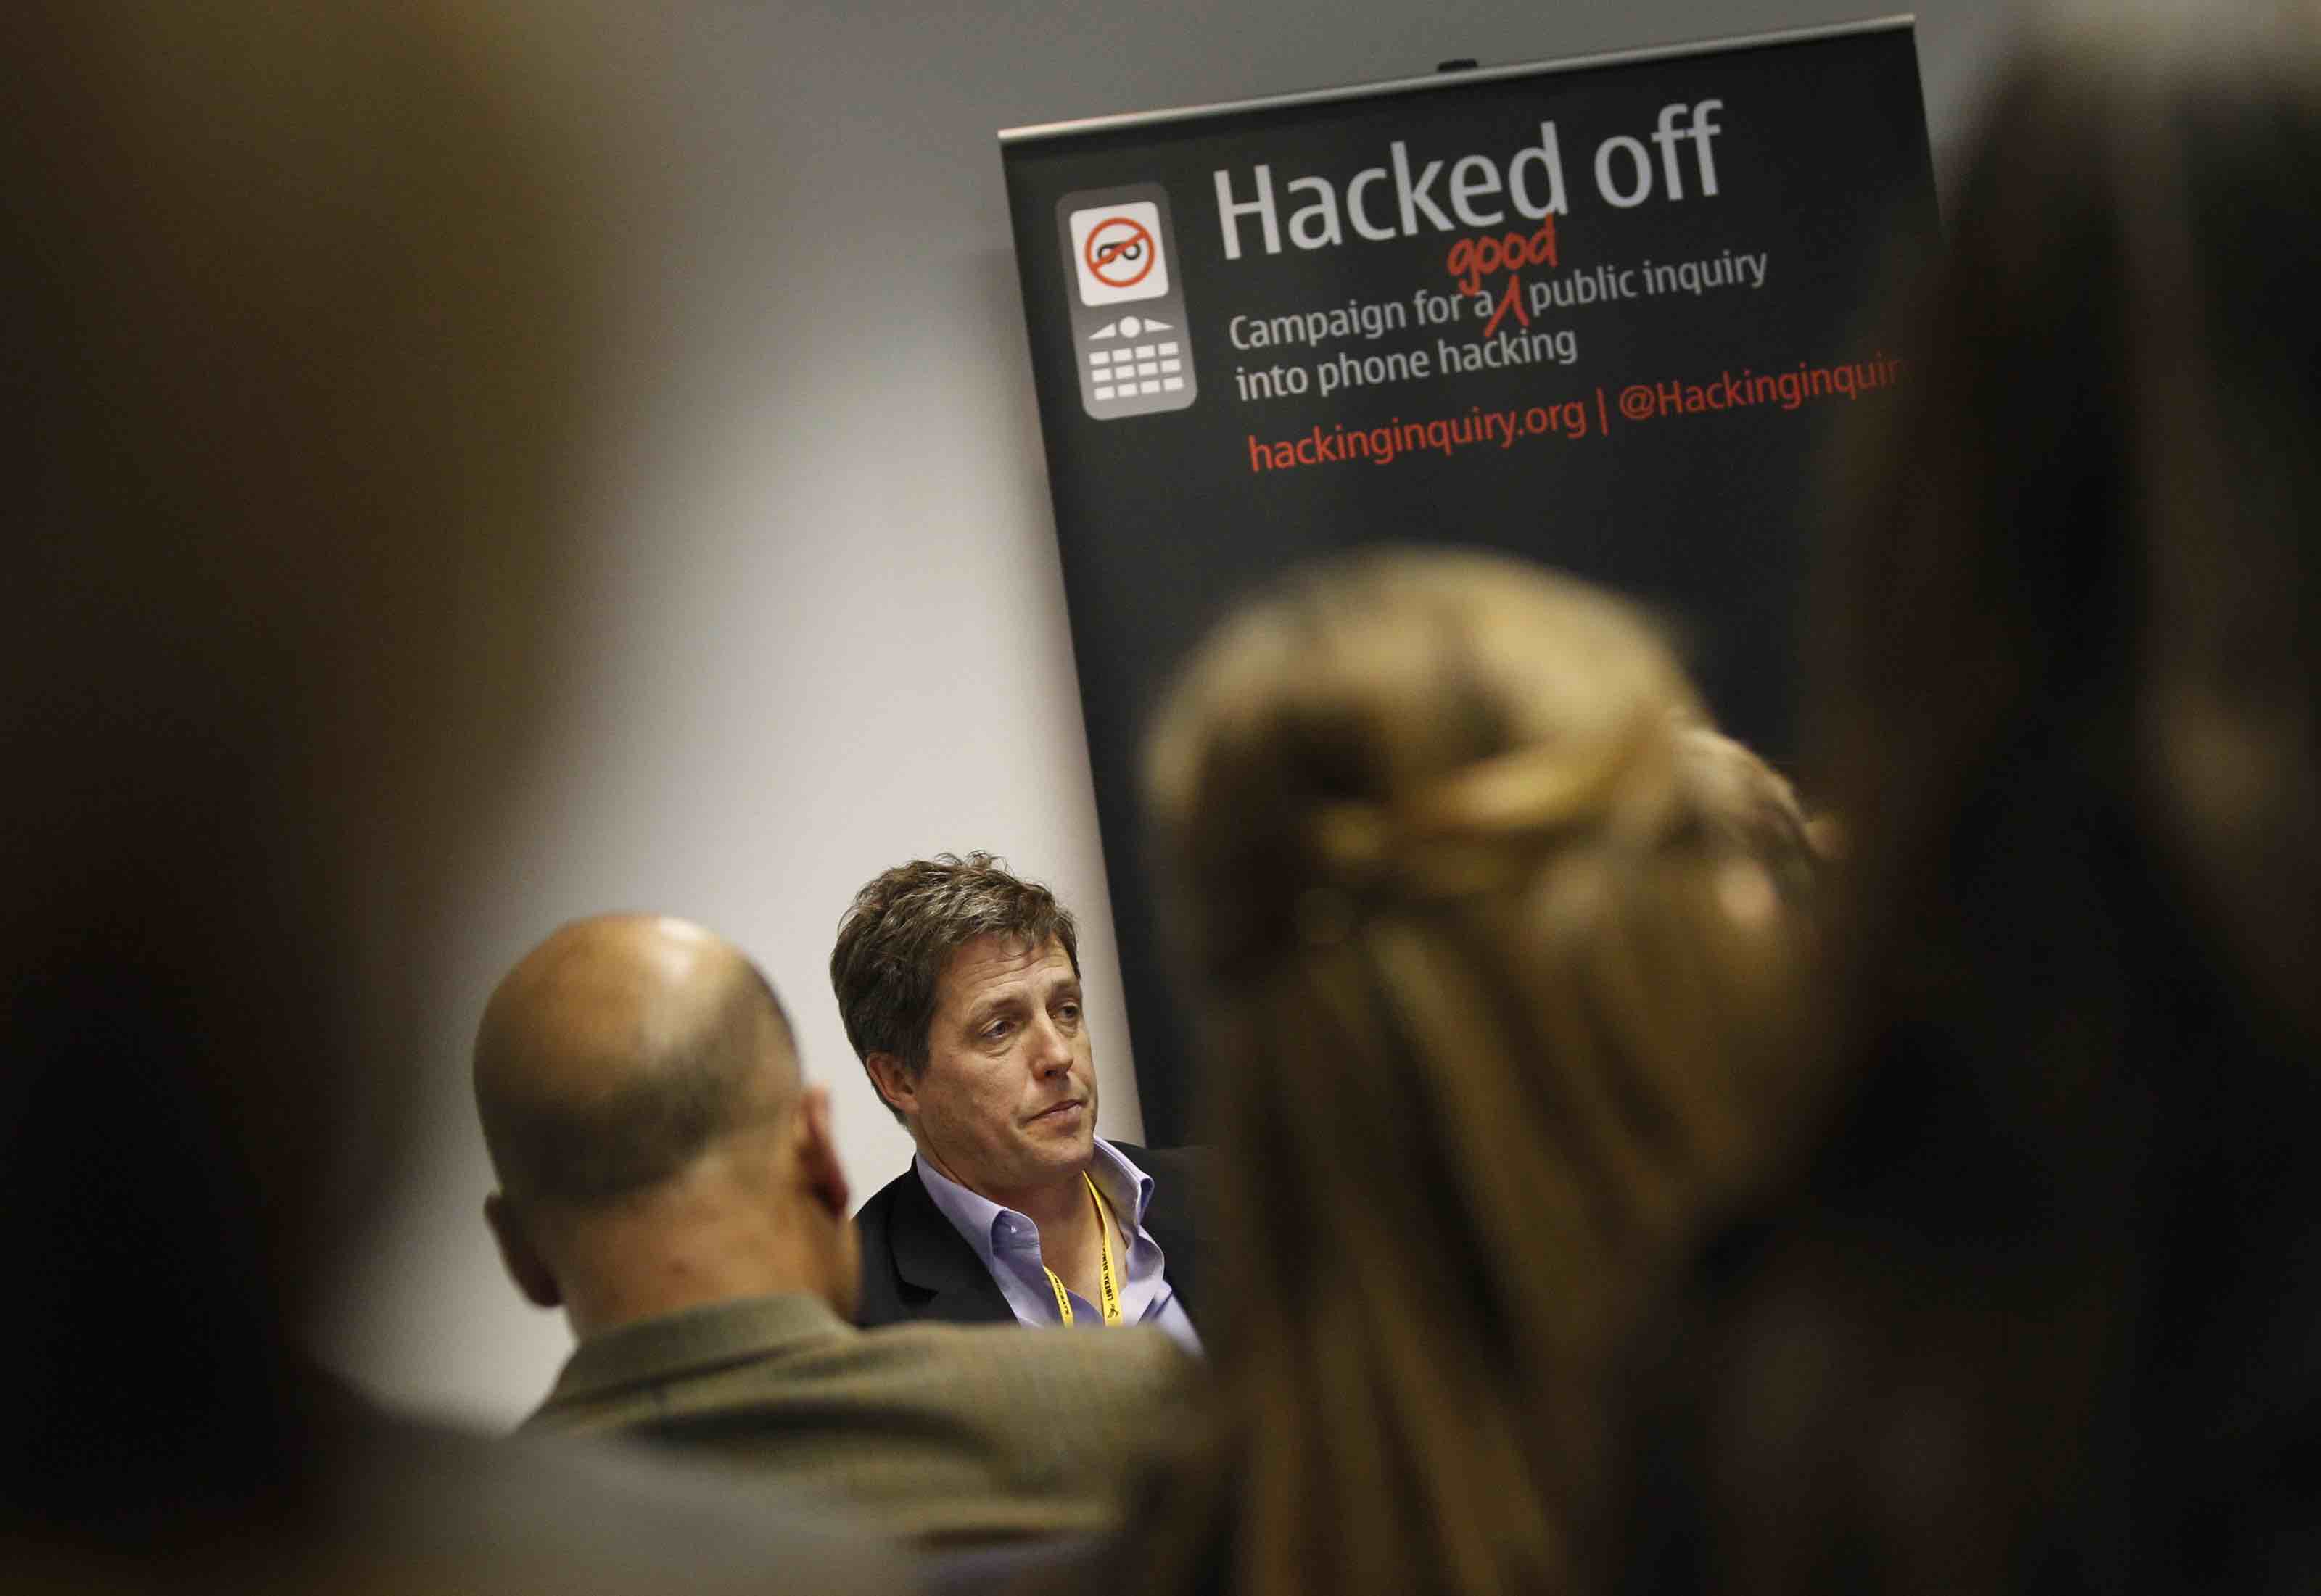 Hugh Grant (C) speaks at a news conference during the Liberal Democrats annual autumn conference in Birmingham, central England September 18, 2011. The news conference was organised by "Hacked Off", which is calling for a full public inquiry into the phone hacking scandal. REUTERS/Darren Staples